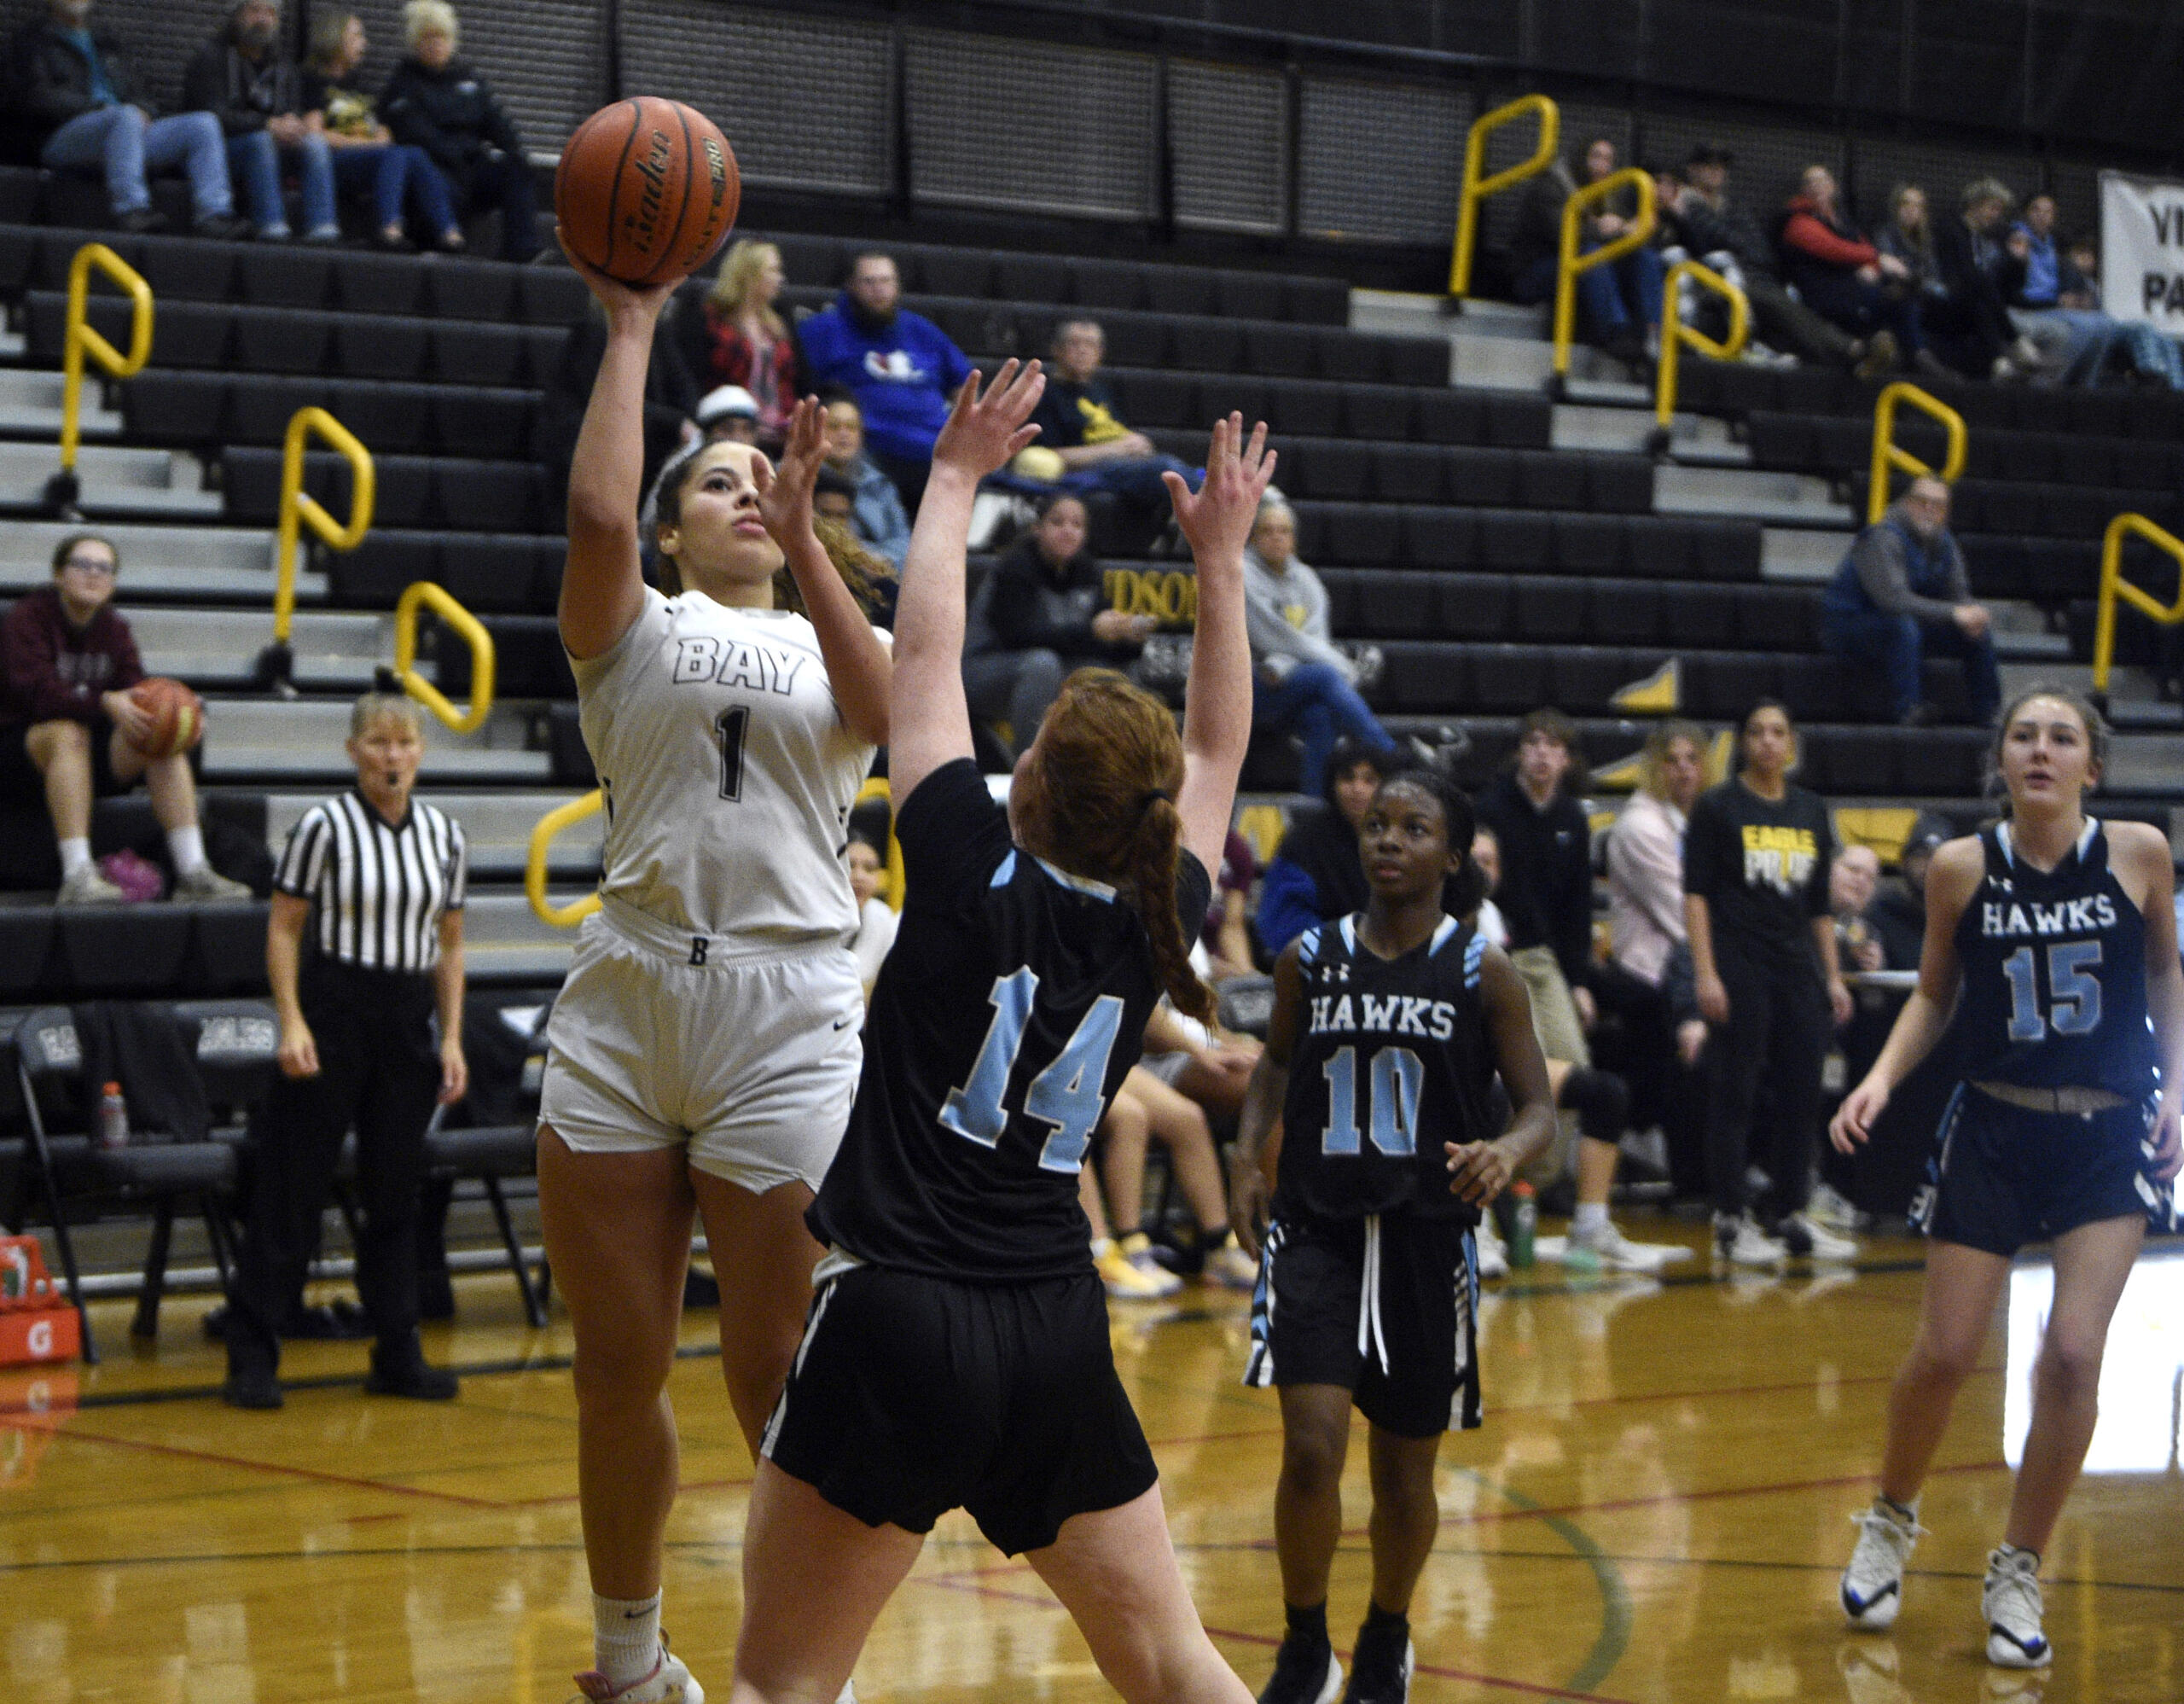 Hudson’s Bay’s Alana Stephens puts up a shot over Hockinson during a 2A Greater St. Helens League girls basketball game on Friday, Dec. 8, 2023, at Hudson’s Bay High School.